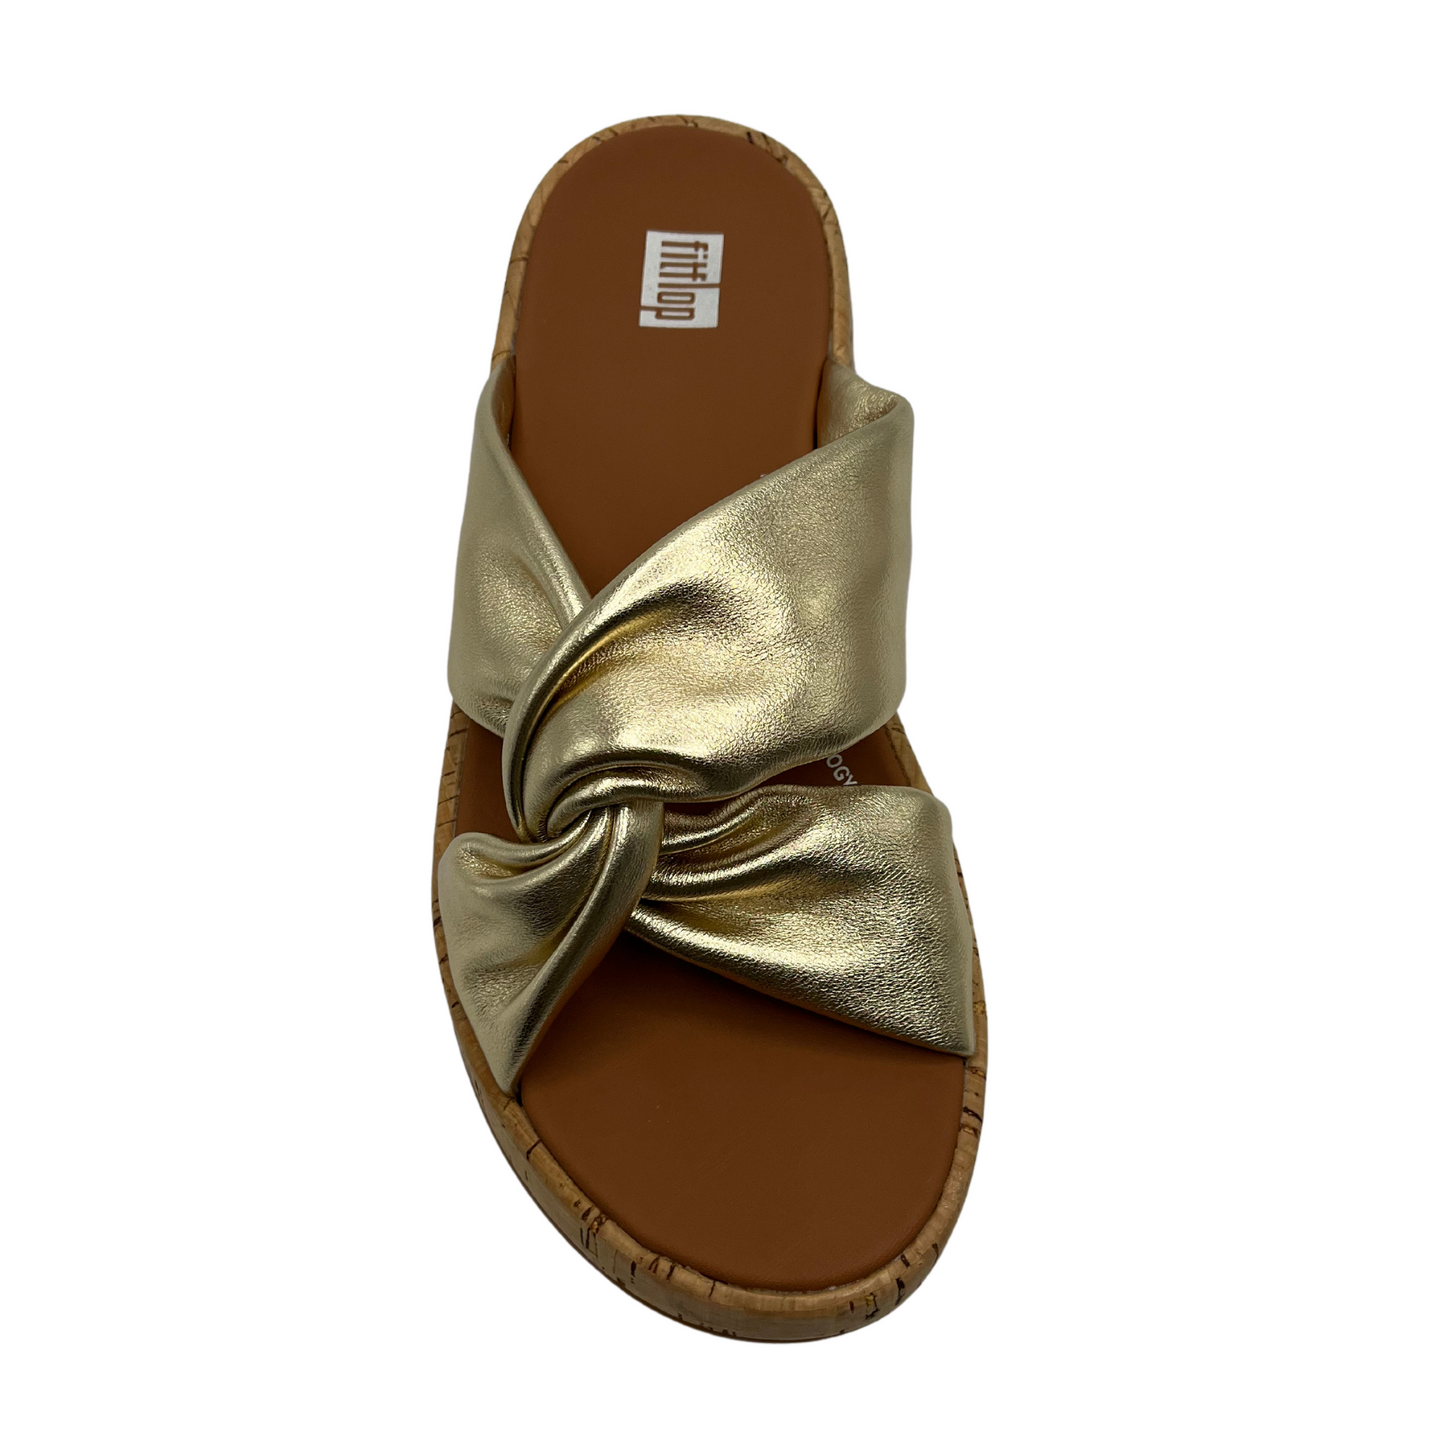 Top view of gold leather strapped sandal with thick platform sole and knot detail